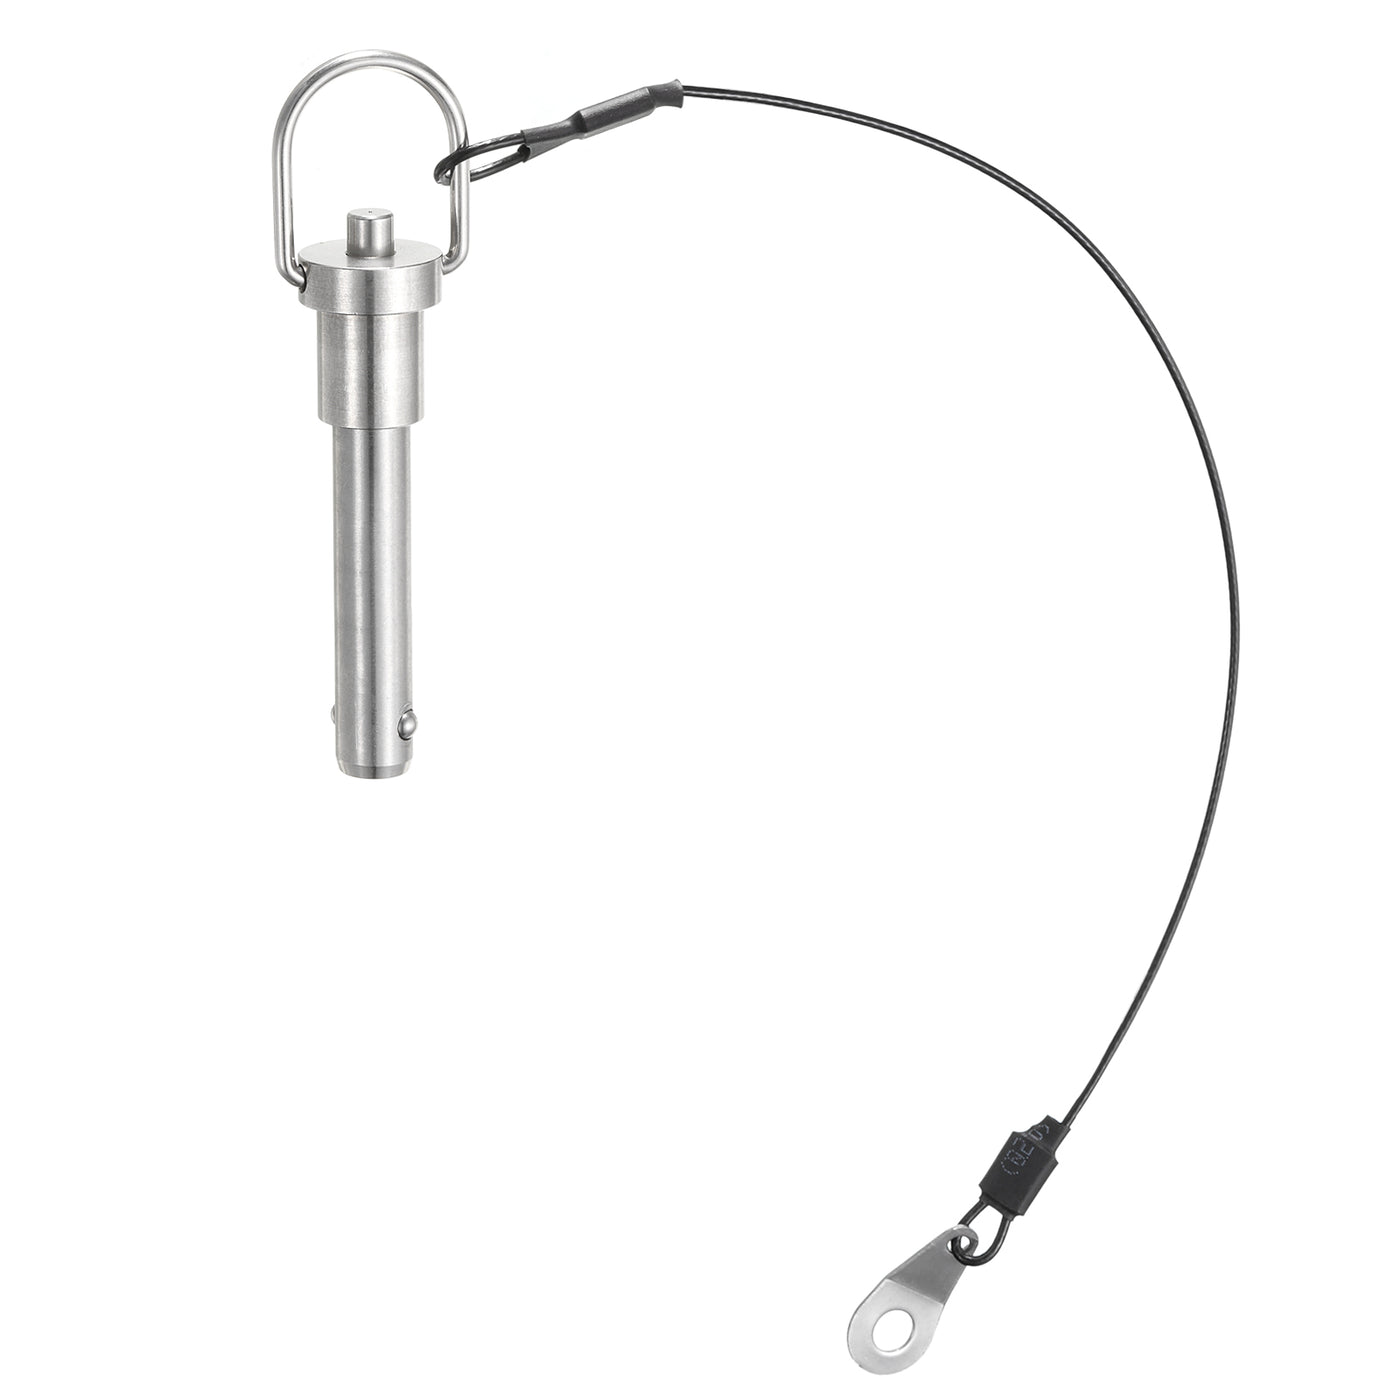 uxcell Uxcell Ball Locking Pins with Button Handle, 10mm Pin Dia. 35mm Usage Length Push-Button Quick Release Pin with Lanyard Cable, 304 Stainless Steel